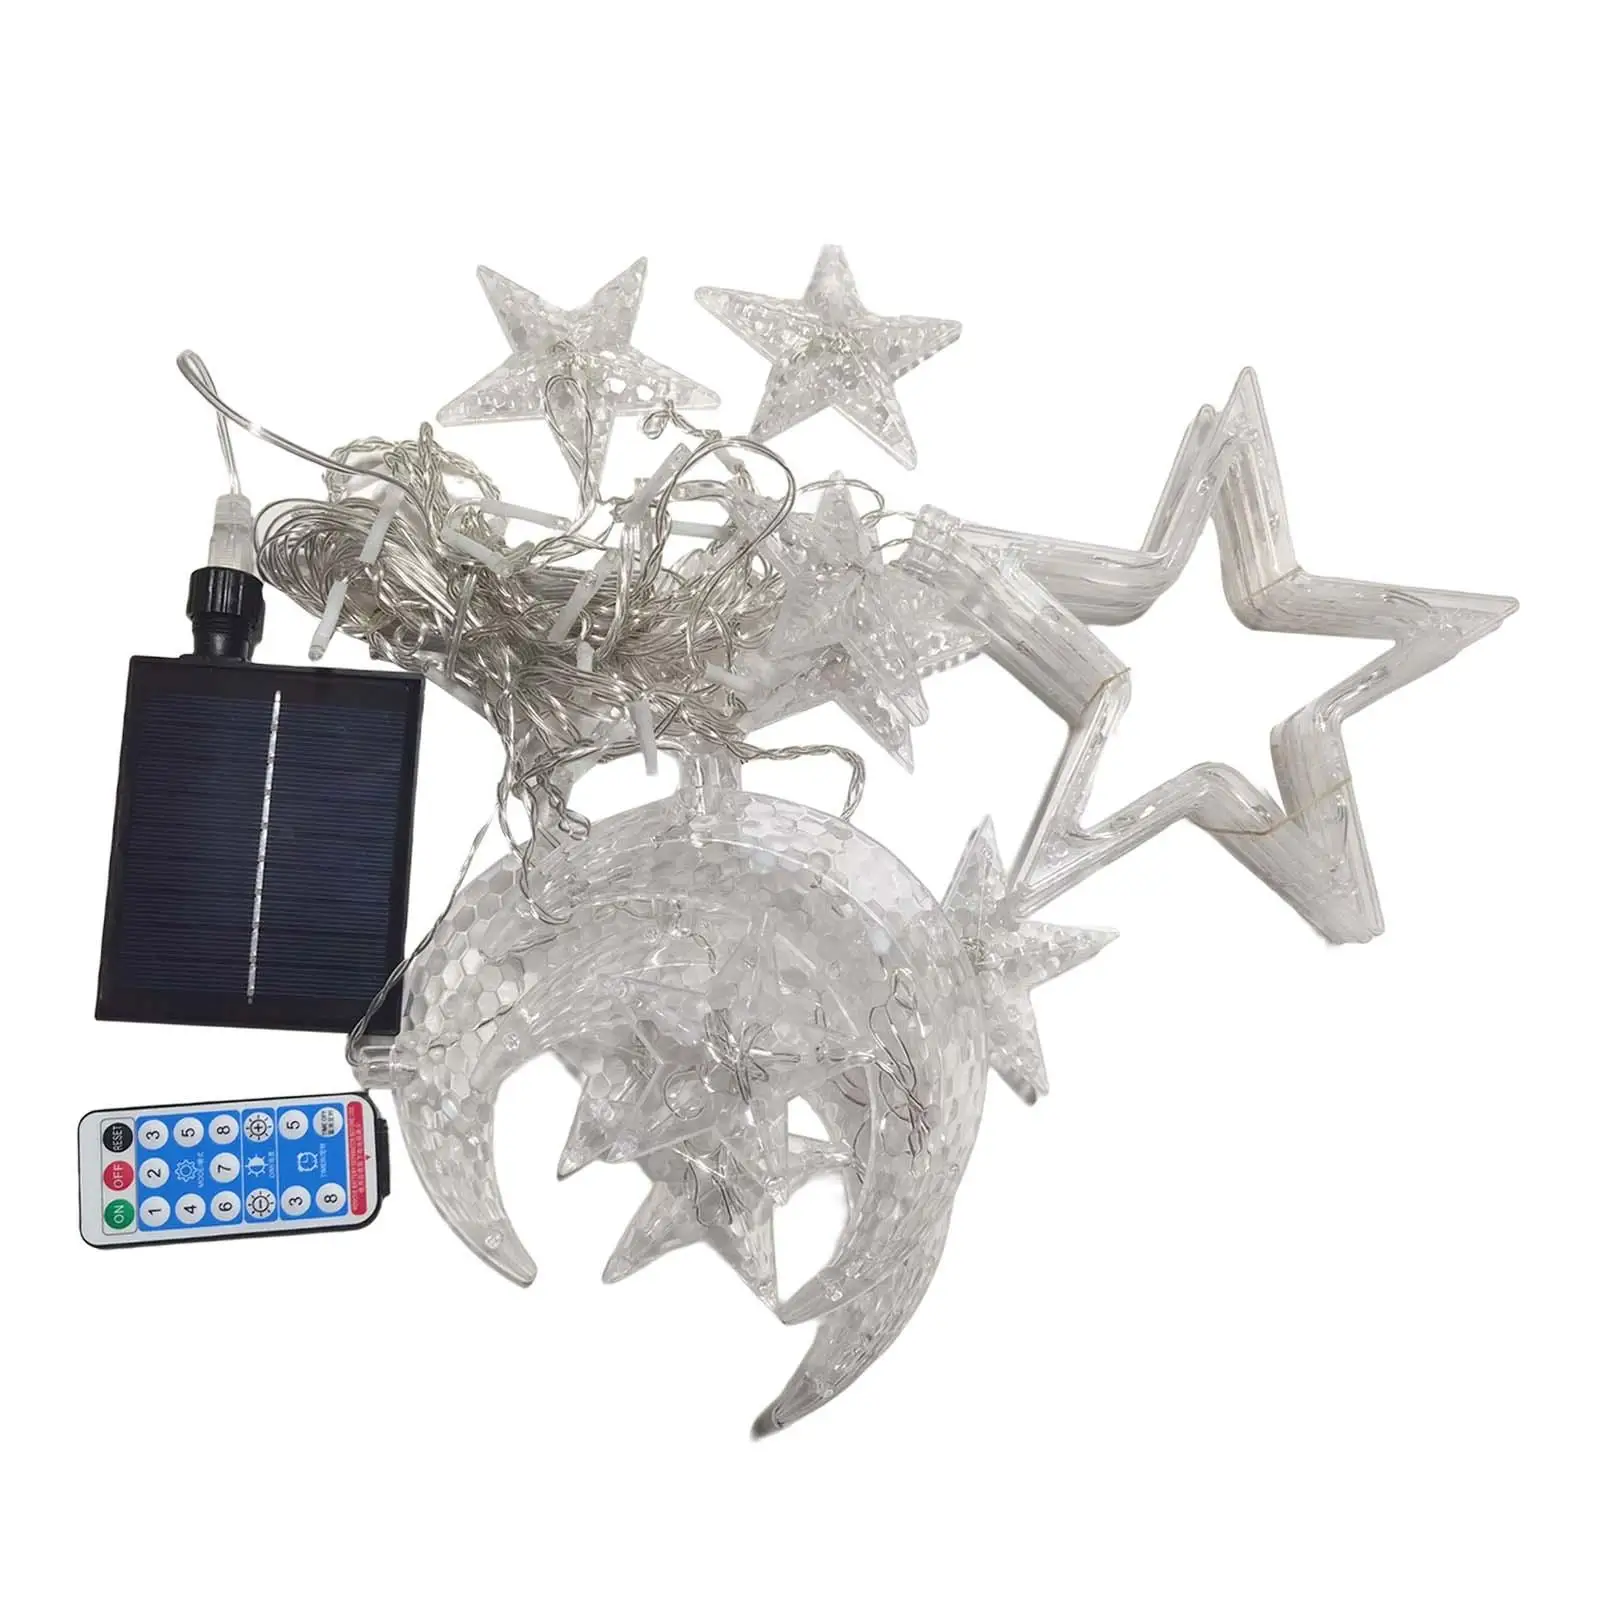 Solar Powered String Lights for Christmas New Year Home Decor Window Living Room